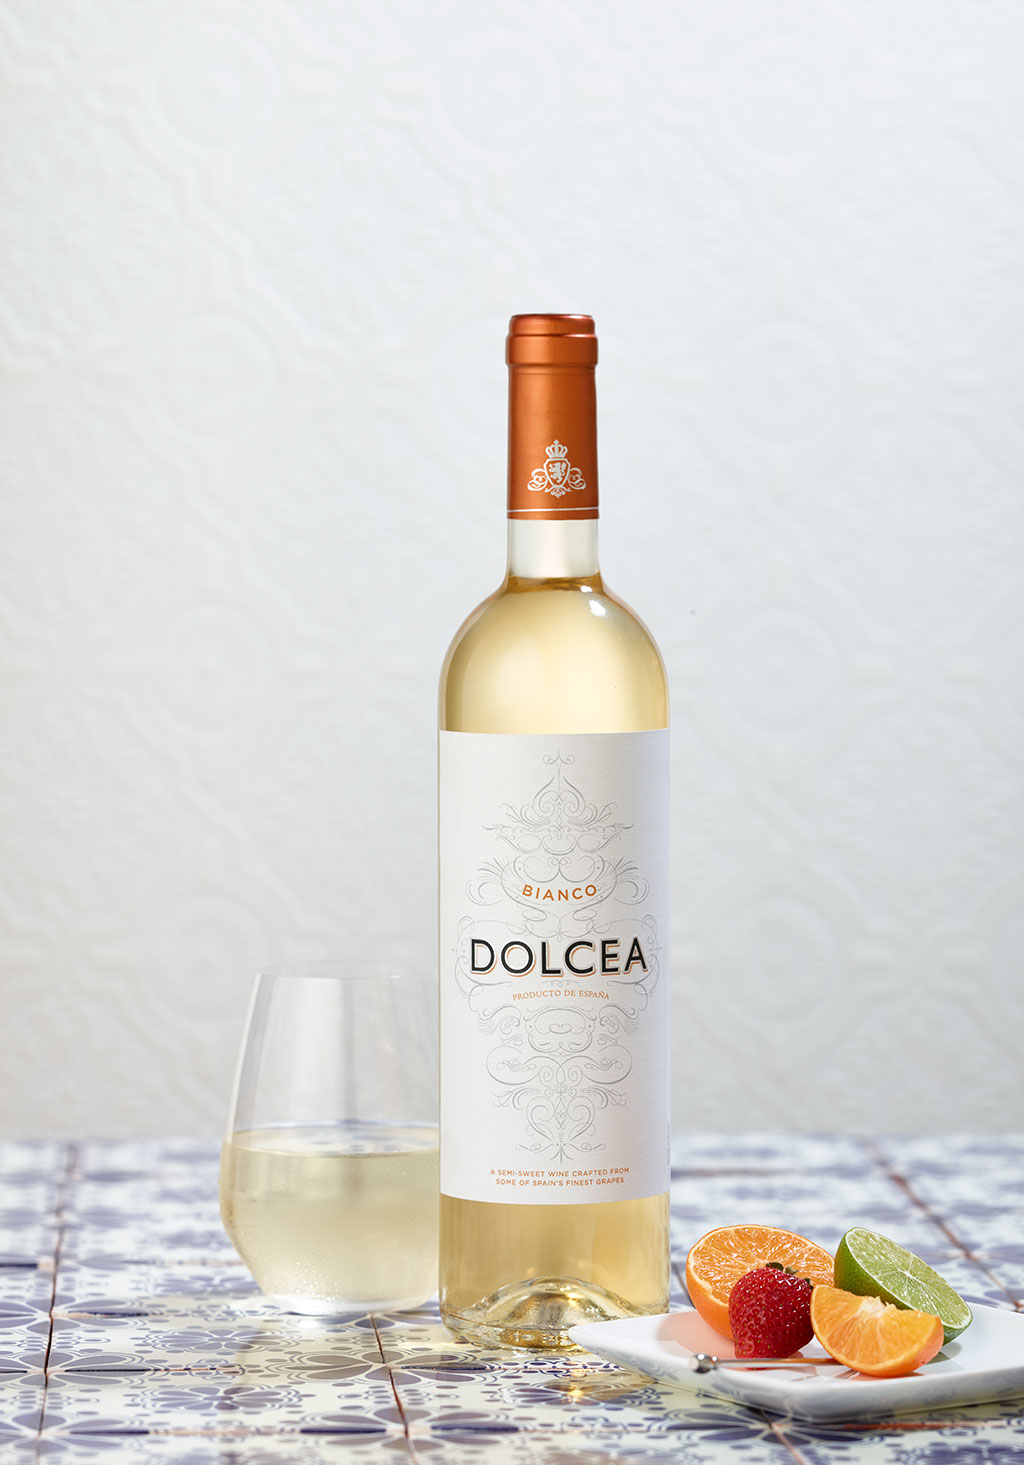 dolcea bianco wine sitting on table